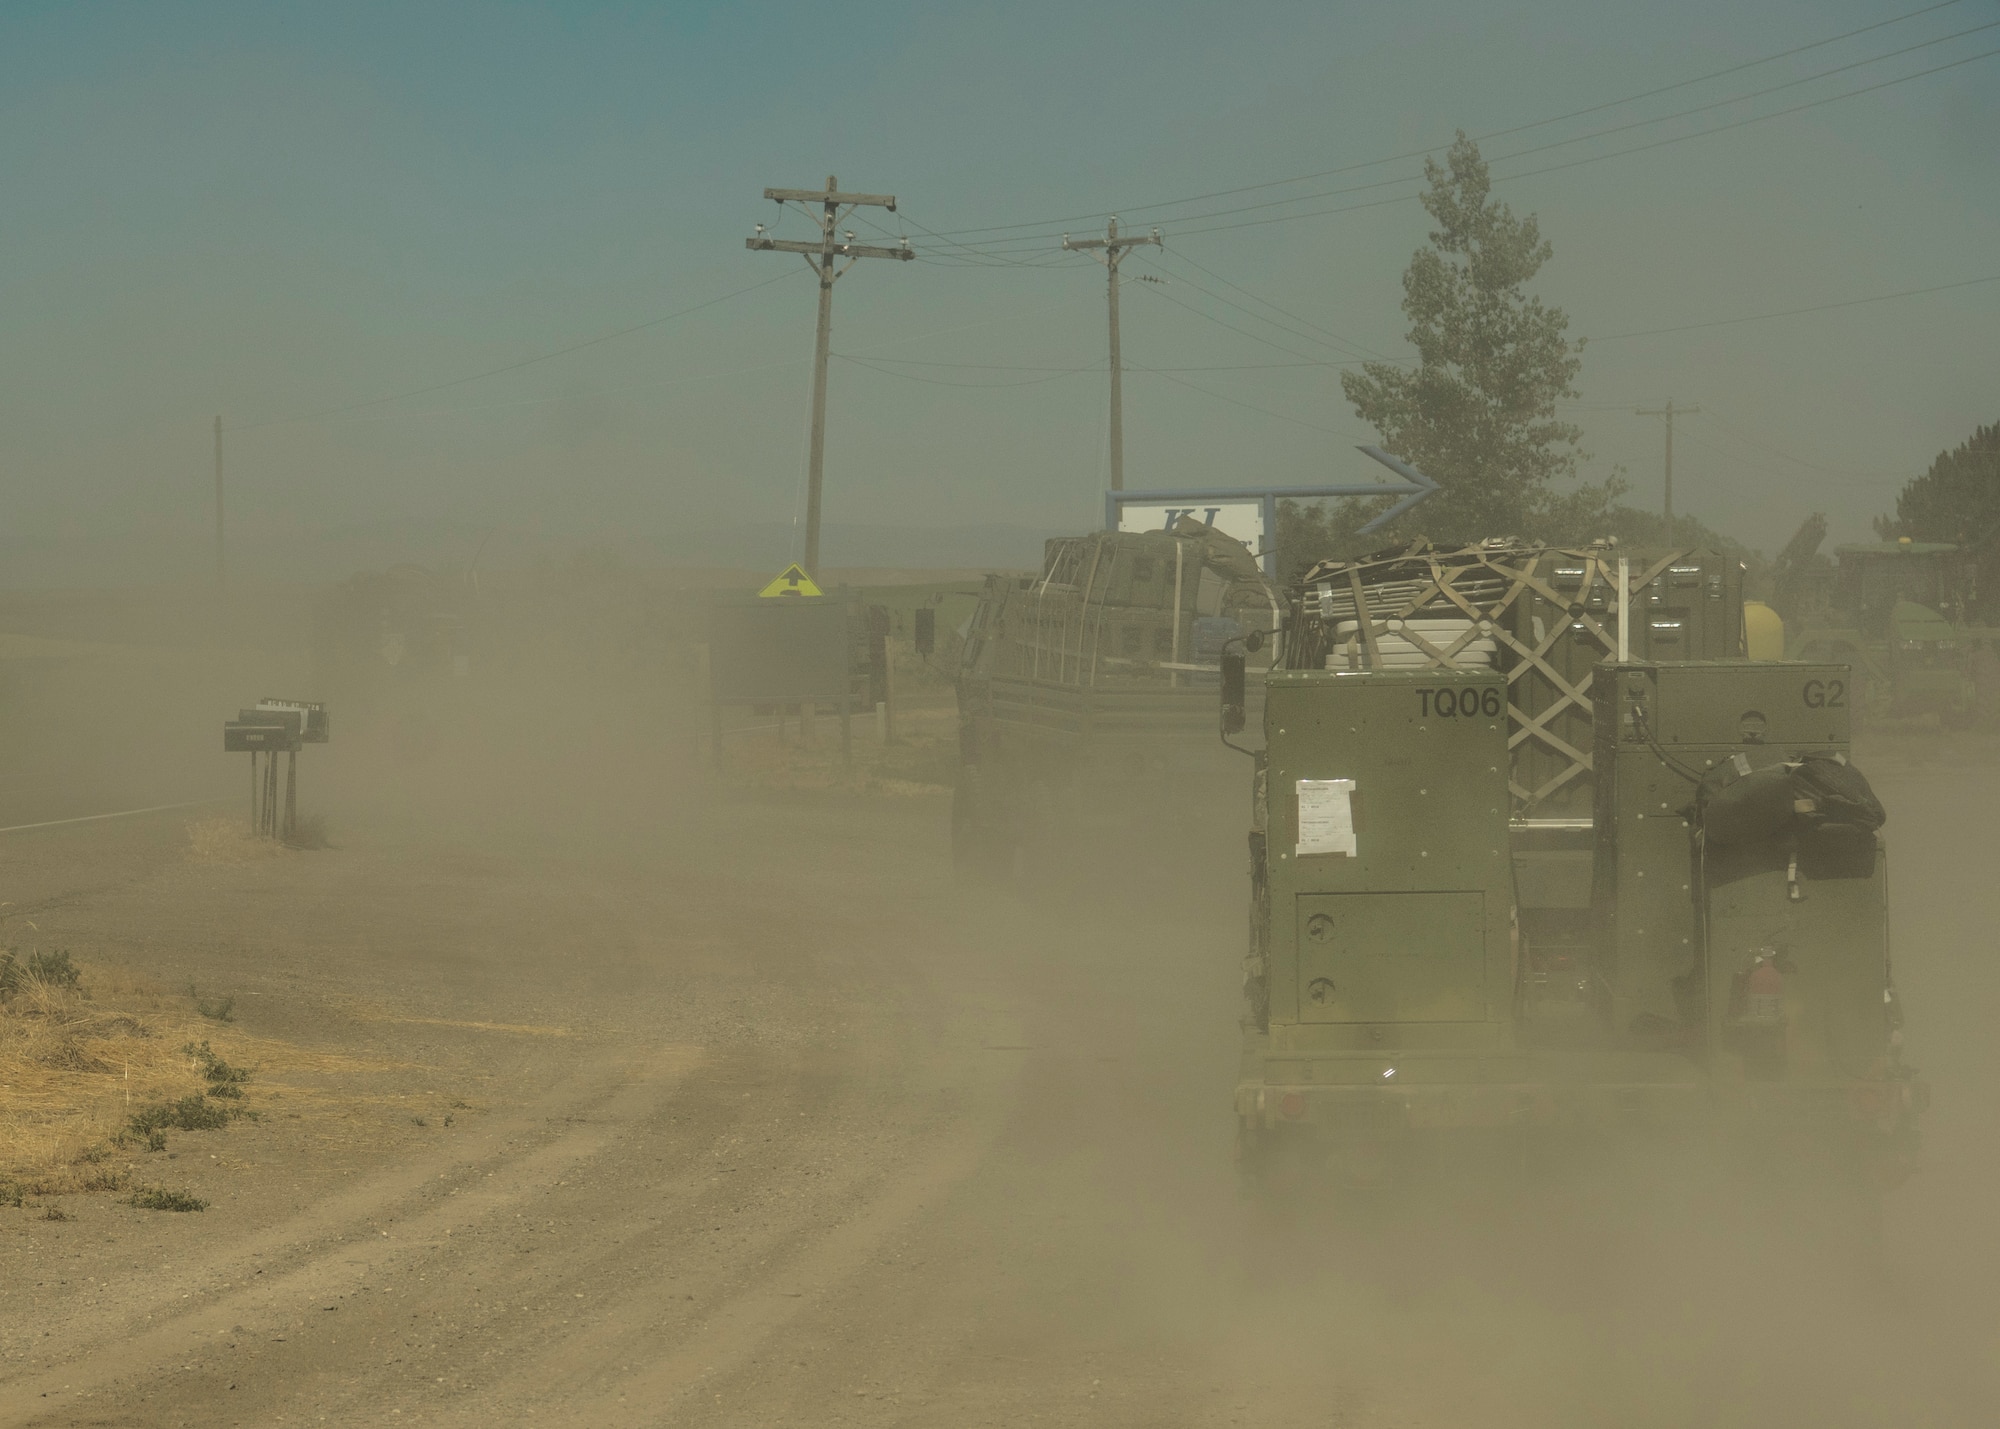 A U.S. Air Force convoy of 5-ton trucks from the 726th Air Control Squadron transports a variety of equipment July 14, 2019, near Mountain Home Air Force Base, Idaho. This convoy was in support of Hardrock Exercise 19-2, where supplies on the truck enabled the 726th ACS Airmen to set up an entirely self-sufficient base in a simulated remote location. (U.S. Air Force photo by Airman 1st Class Andrew Kobialka)